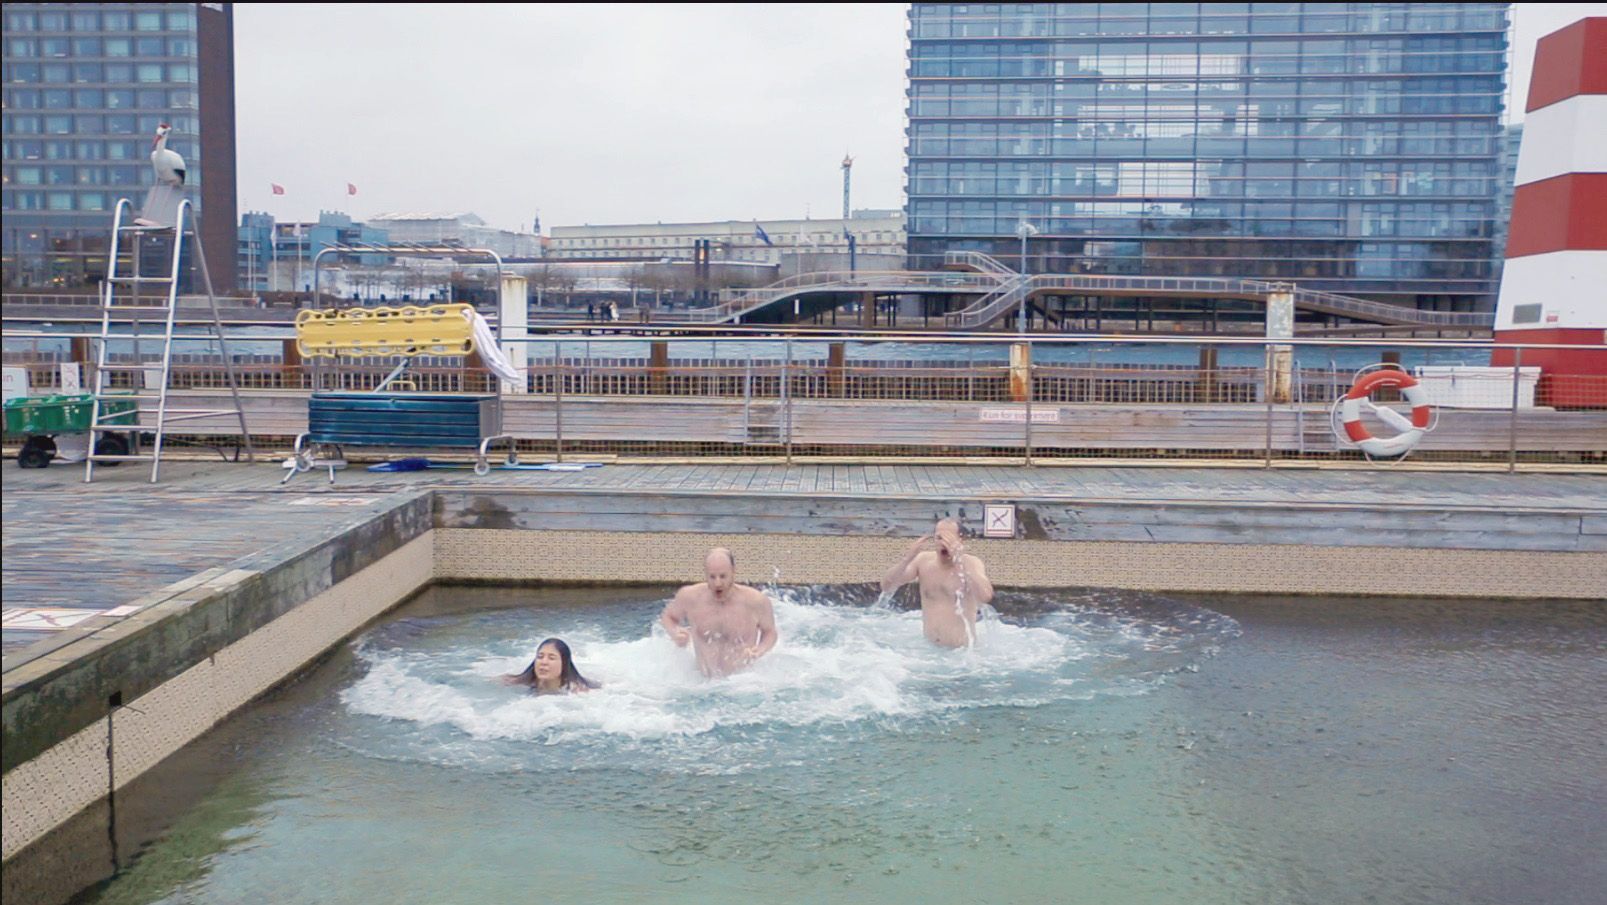 Testing the waters, winter bathing: Freeing the mind or just plain freezing?